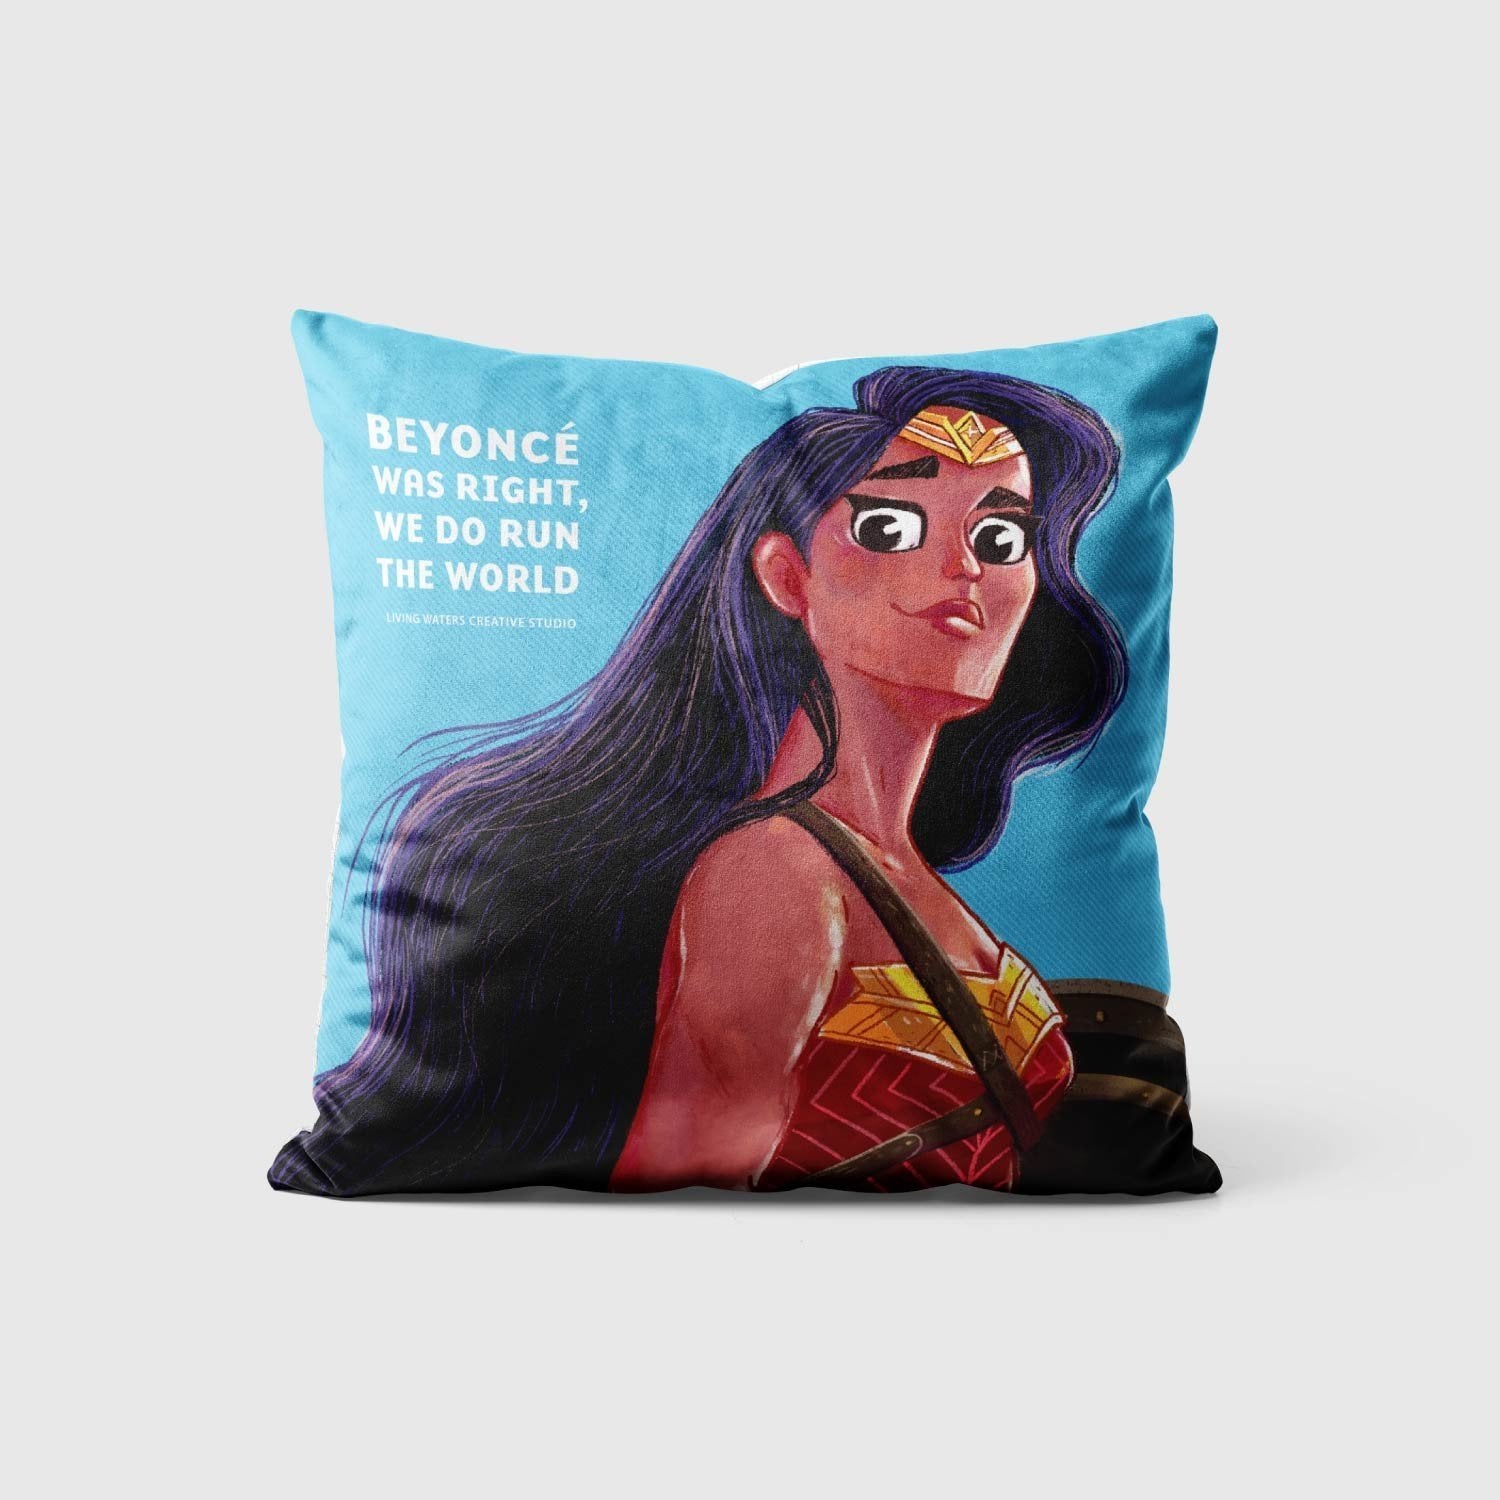 The Fight Like A Girl Cushion Cover